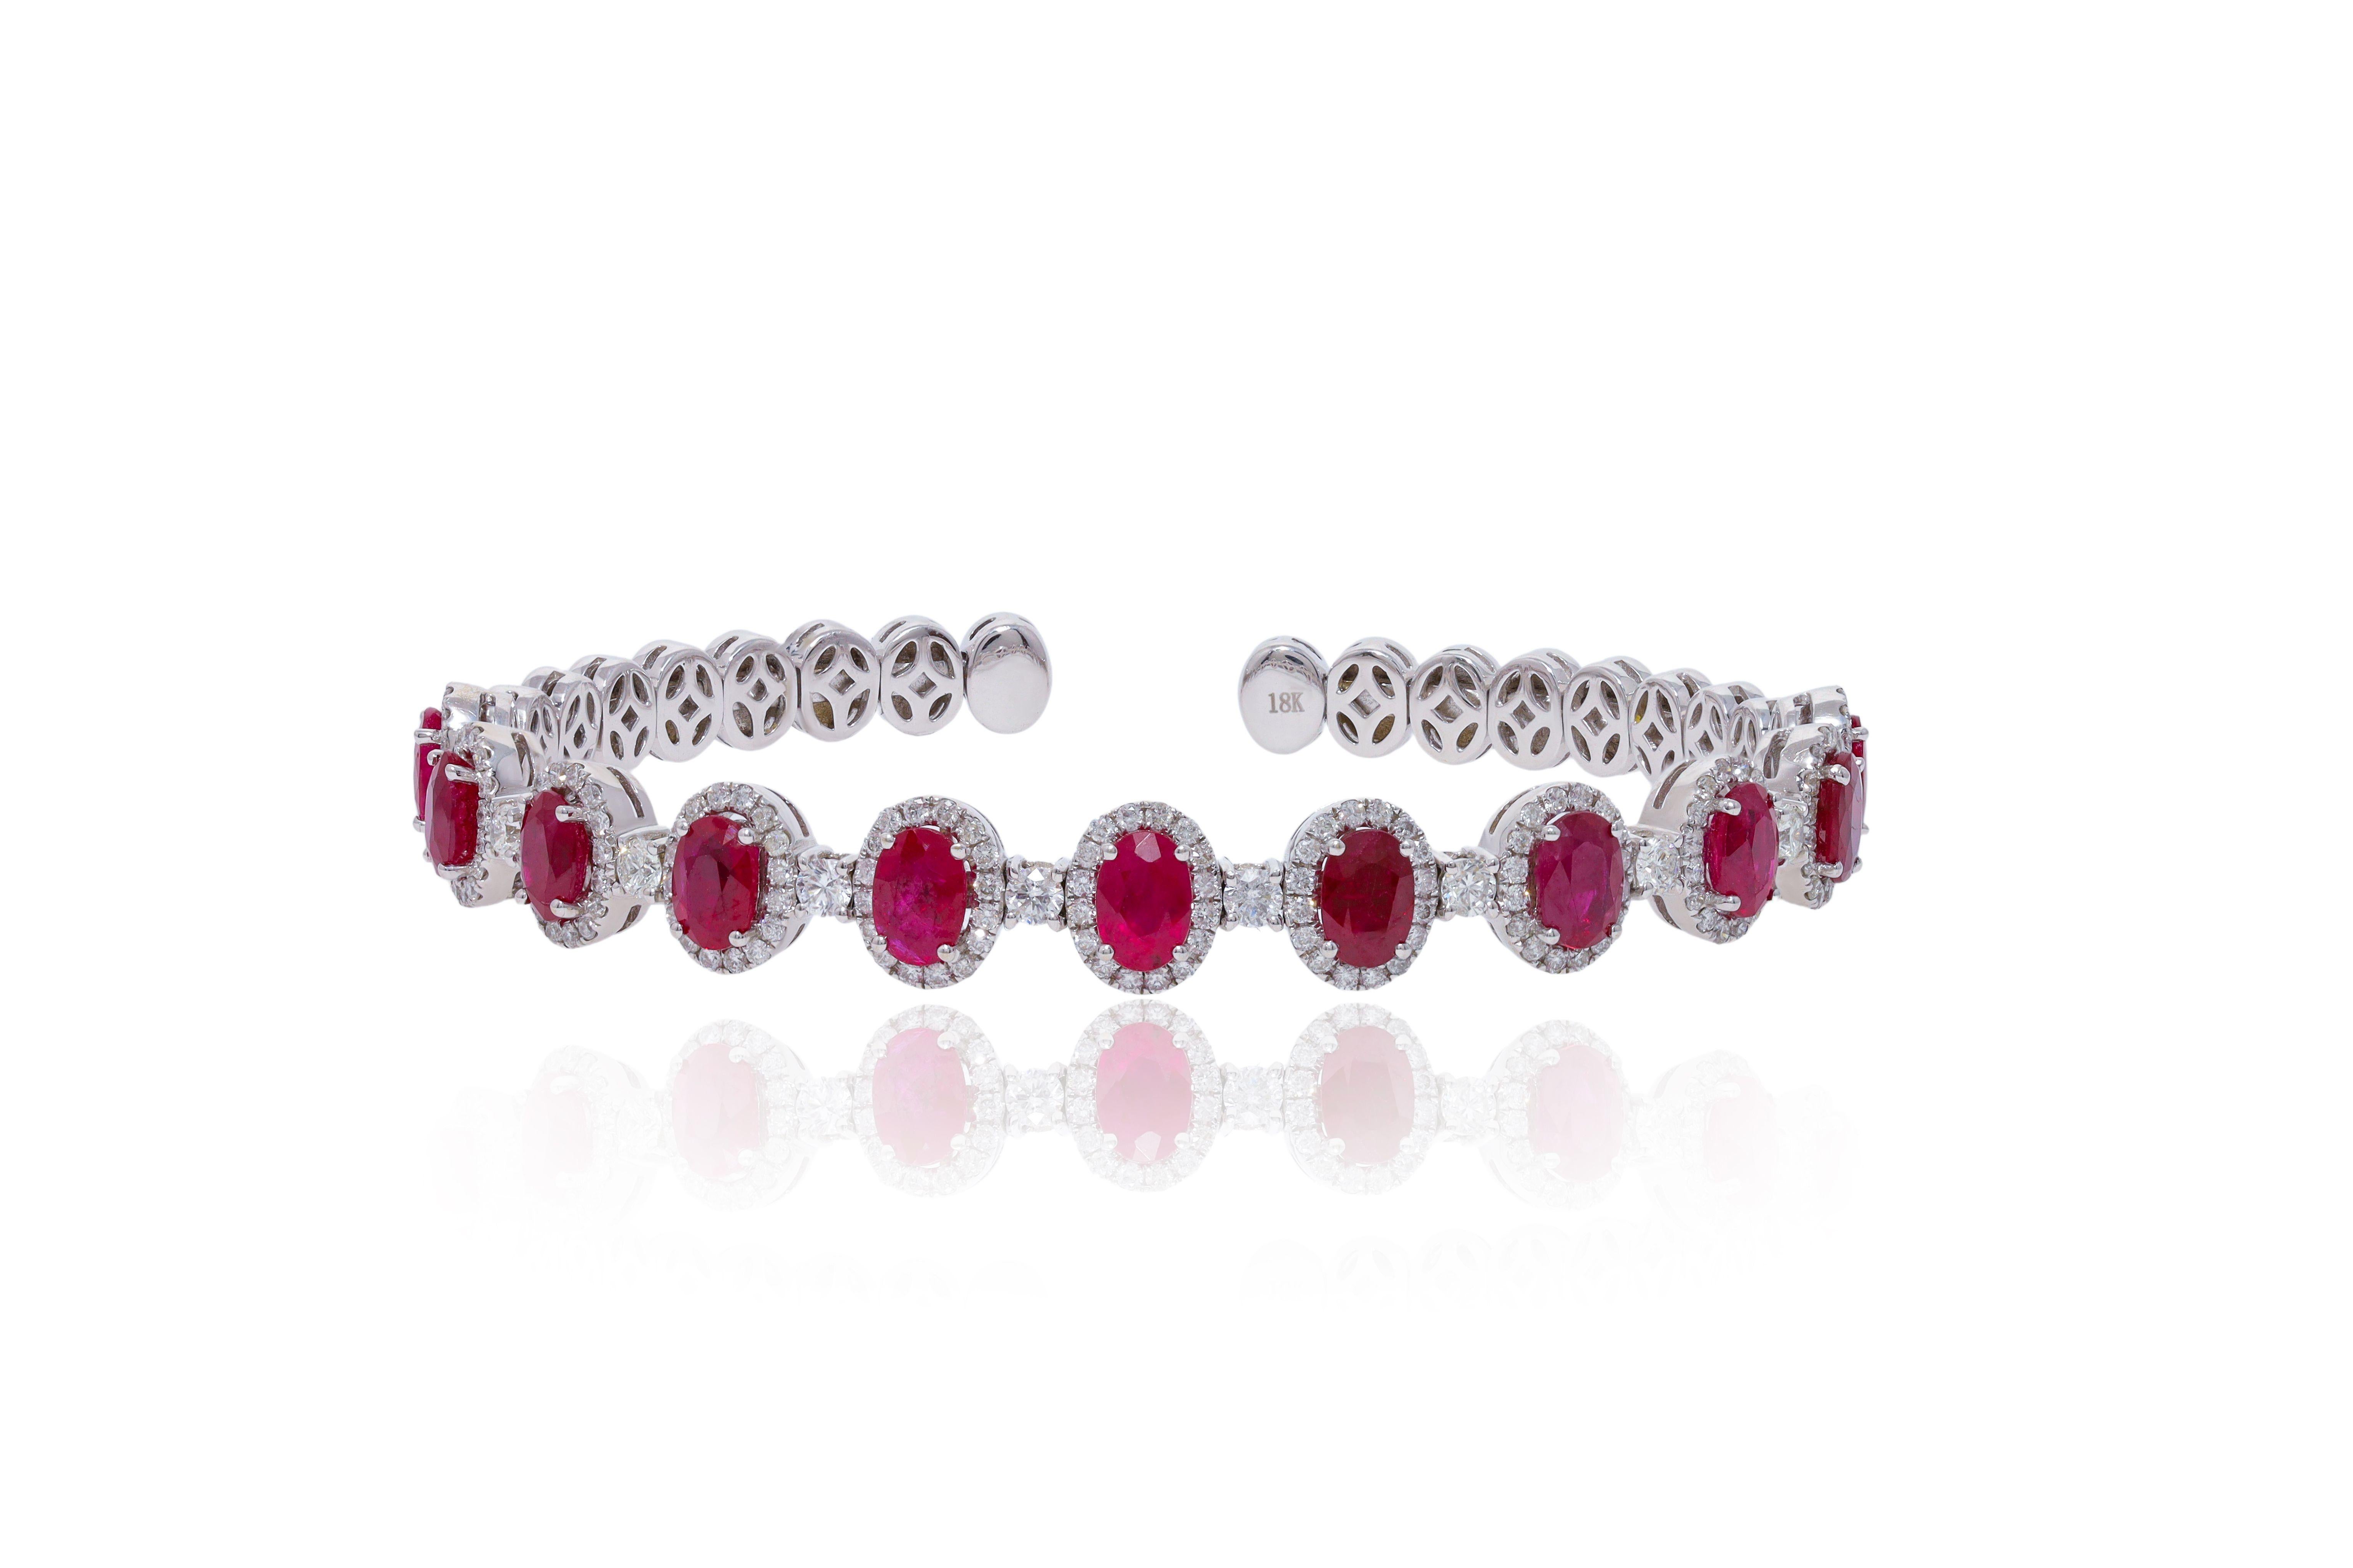 18 kt white gold ruby and diamond bracelet with 6.46 cts tw of rubies surrounded and separated by 1.92 cts tw of diamonds